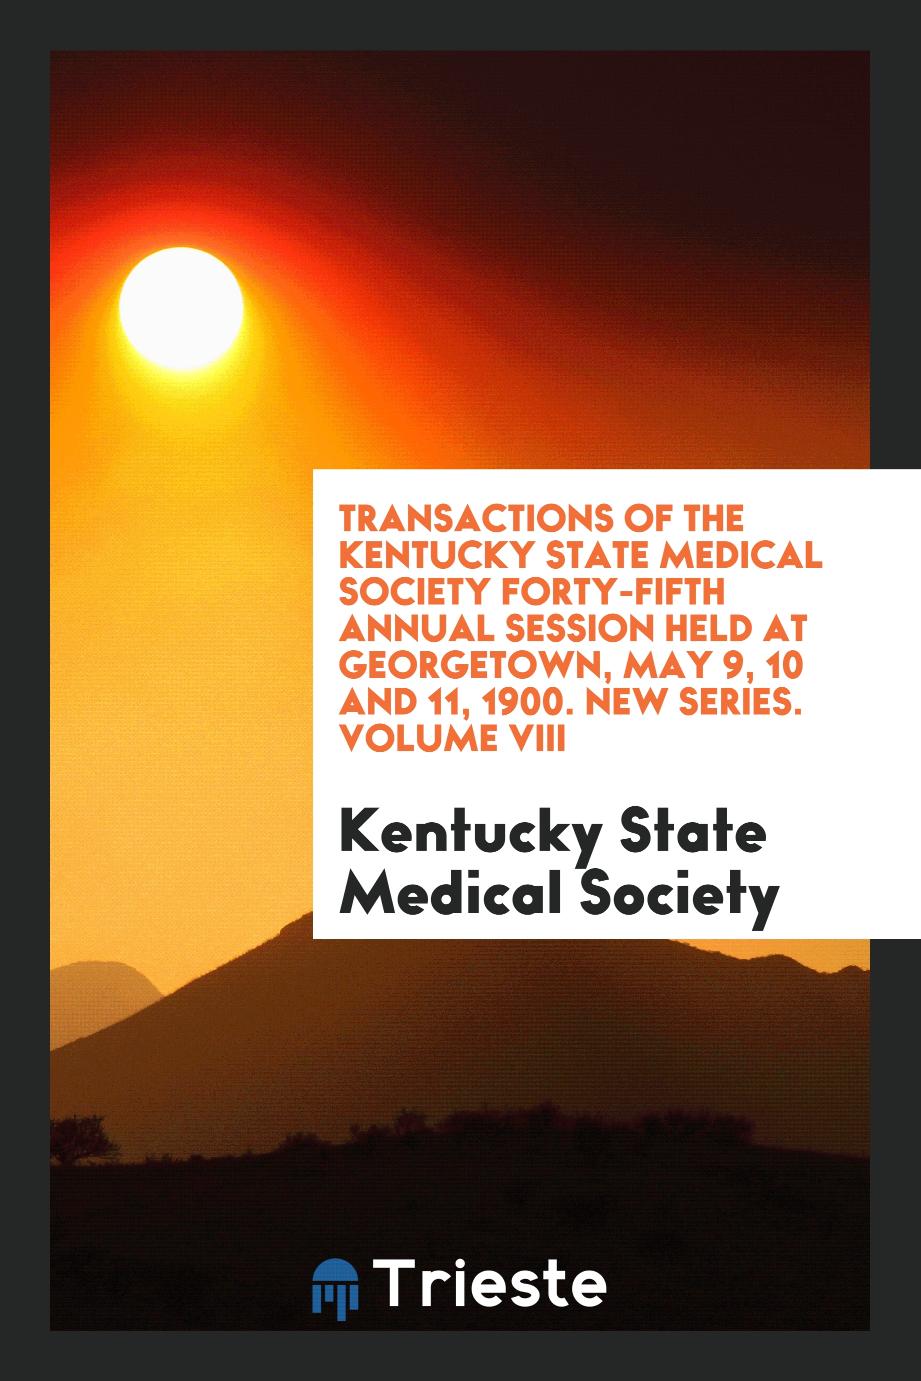 Transactions of the Kentucky State Medical Society Forty-Fifth Annual Session Held at Georgetown, May 9, 10 and 11, 1900. New Series. Volume VIII